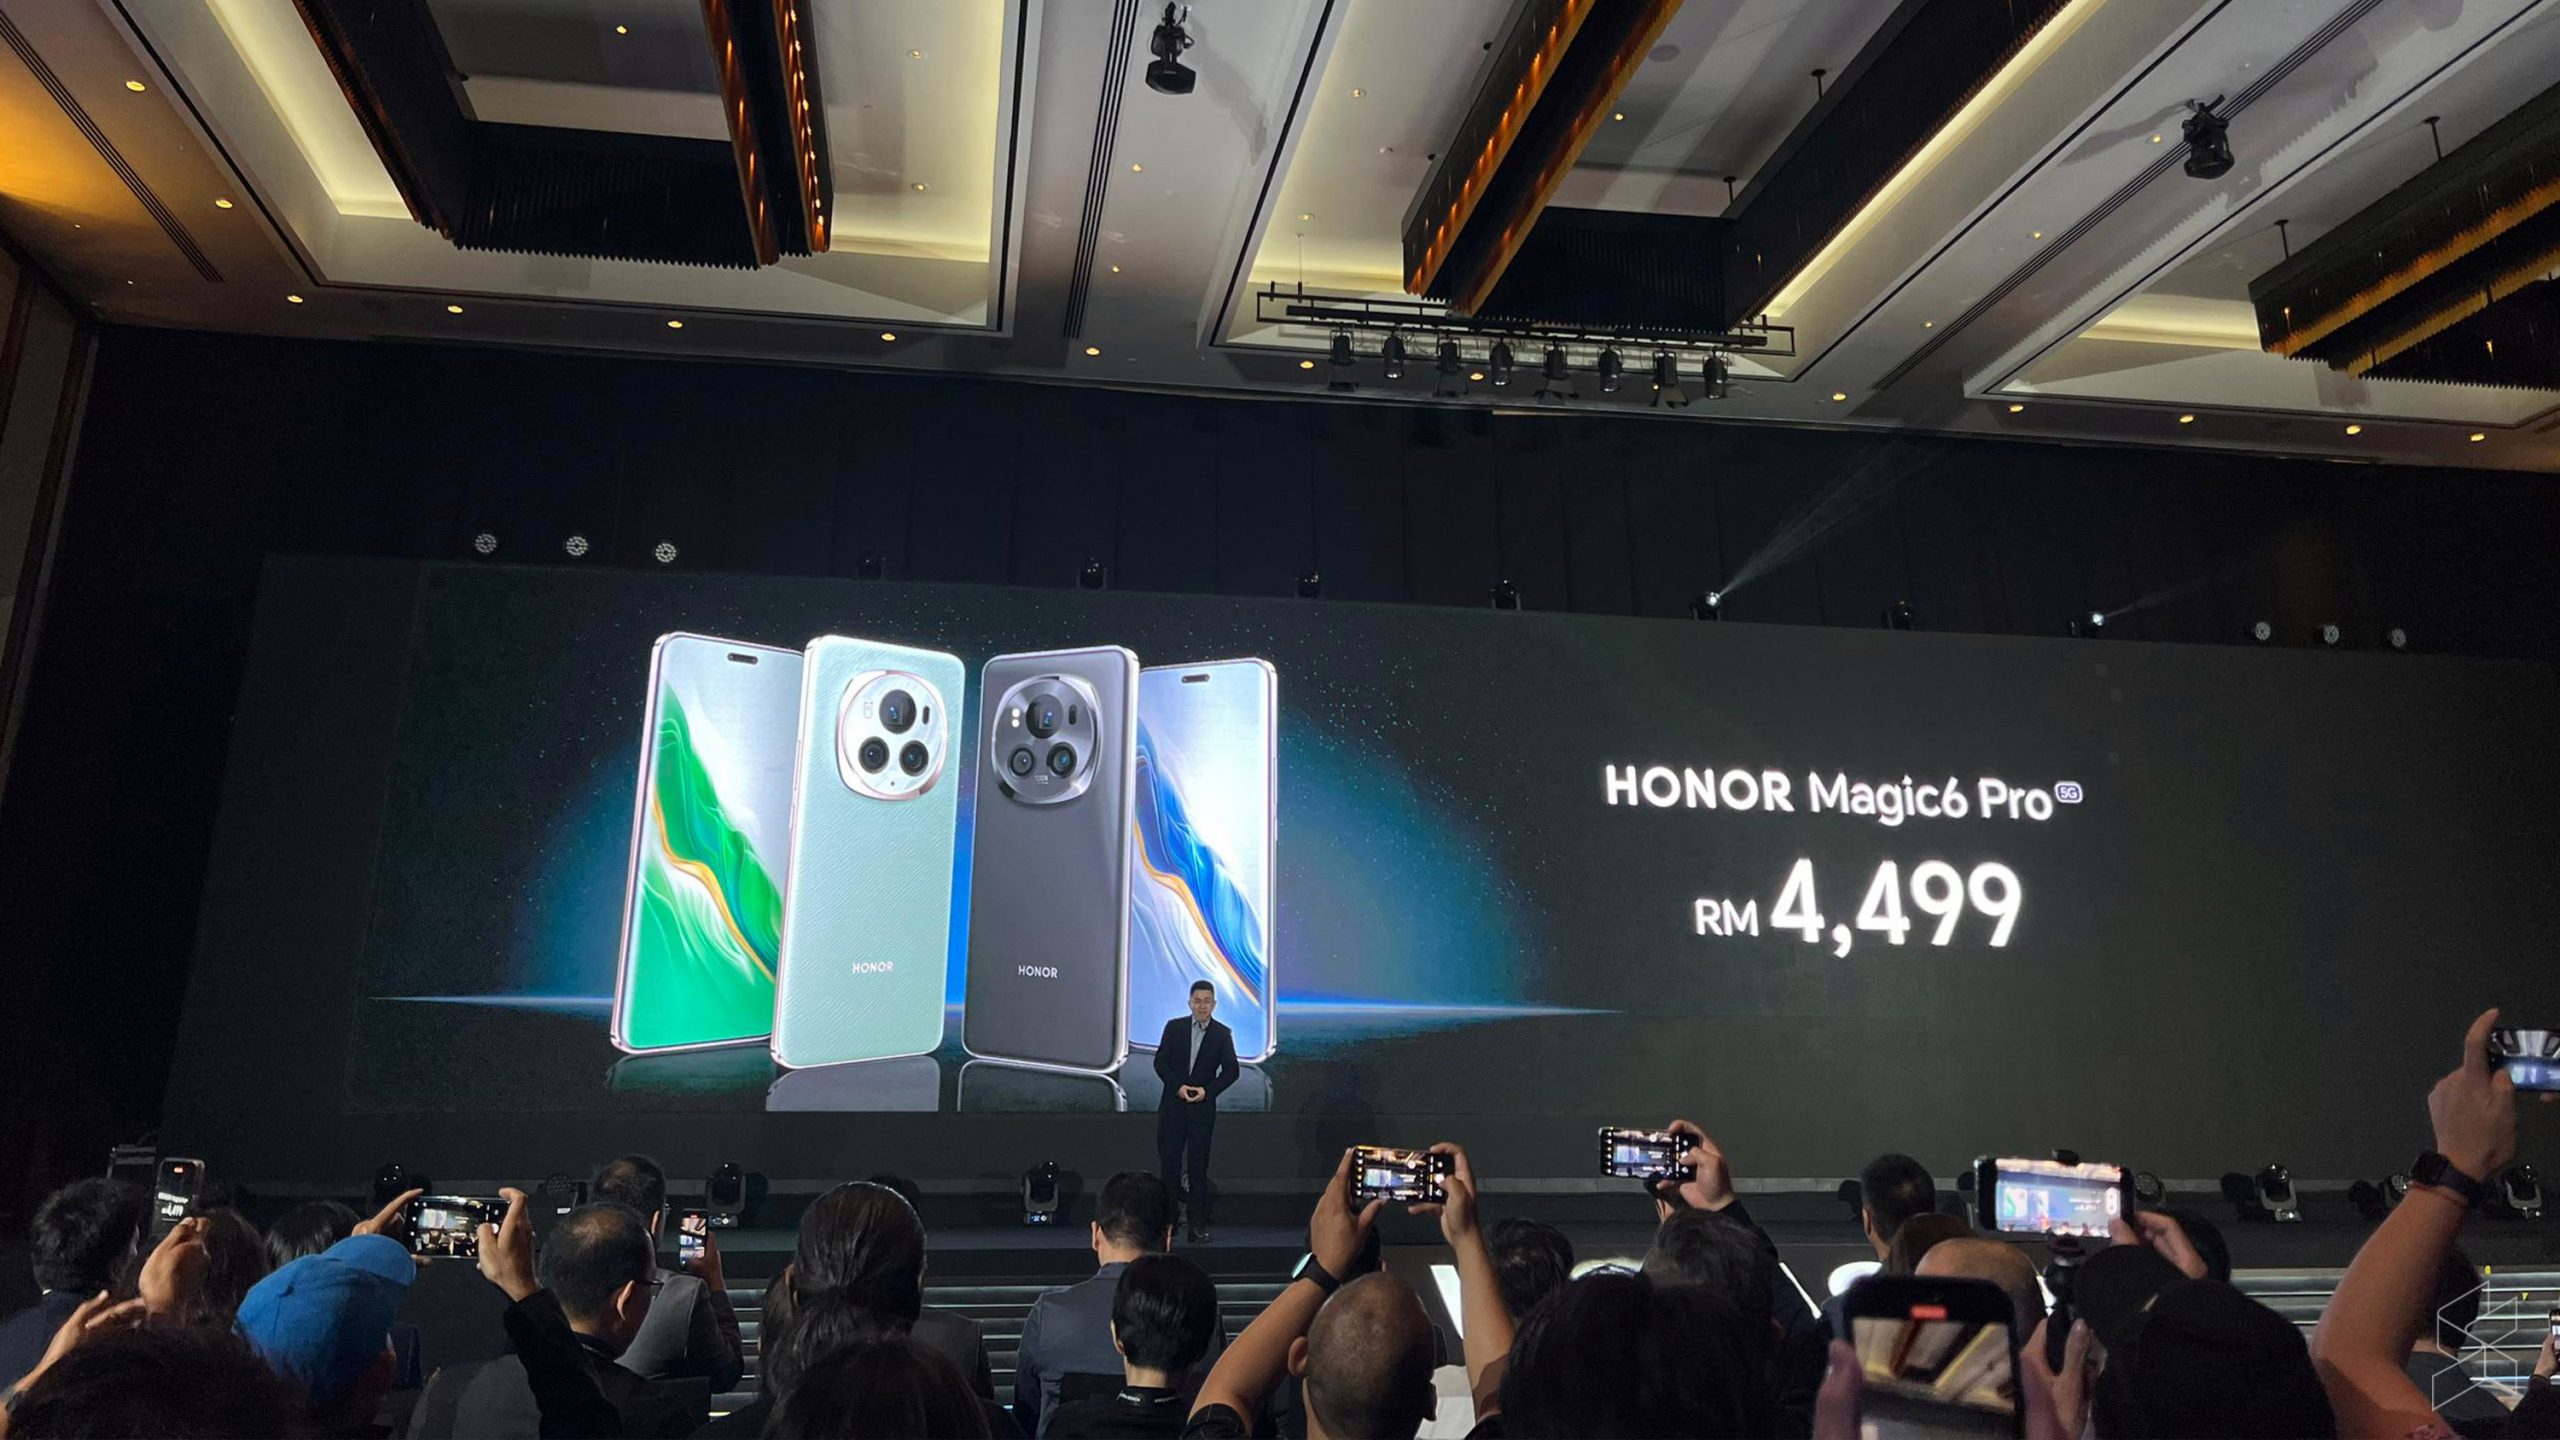 Honor Magic 6 Pro Malaysia: Everything you need to know